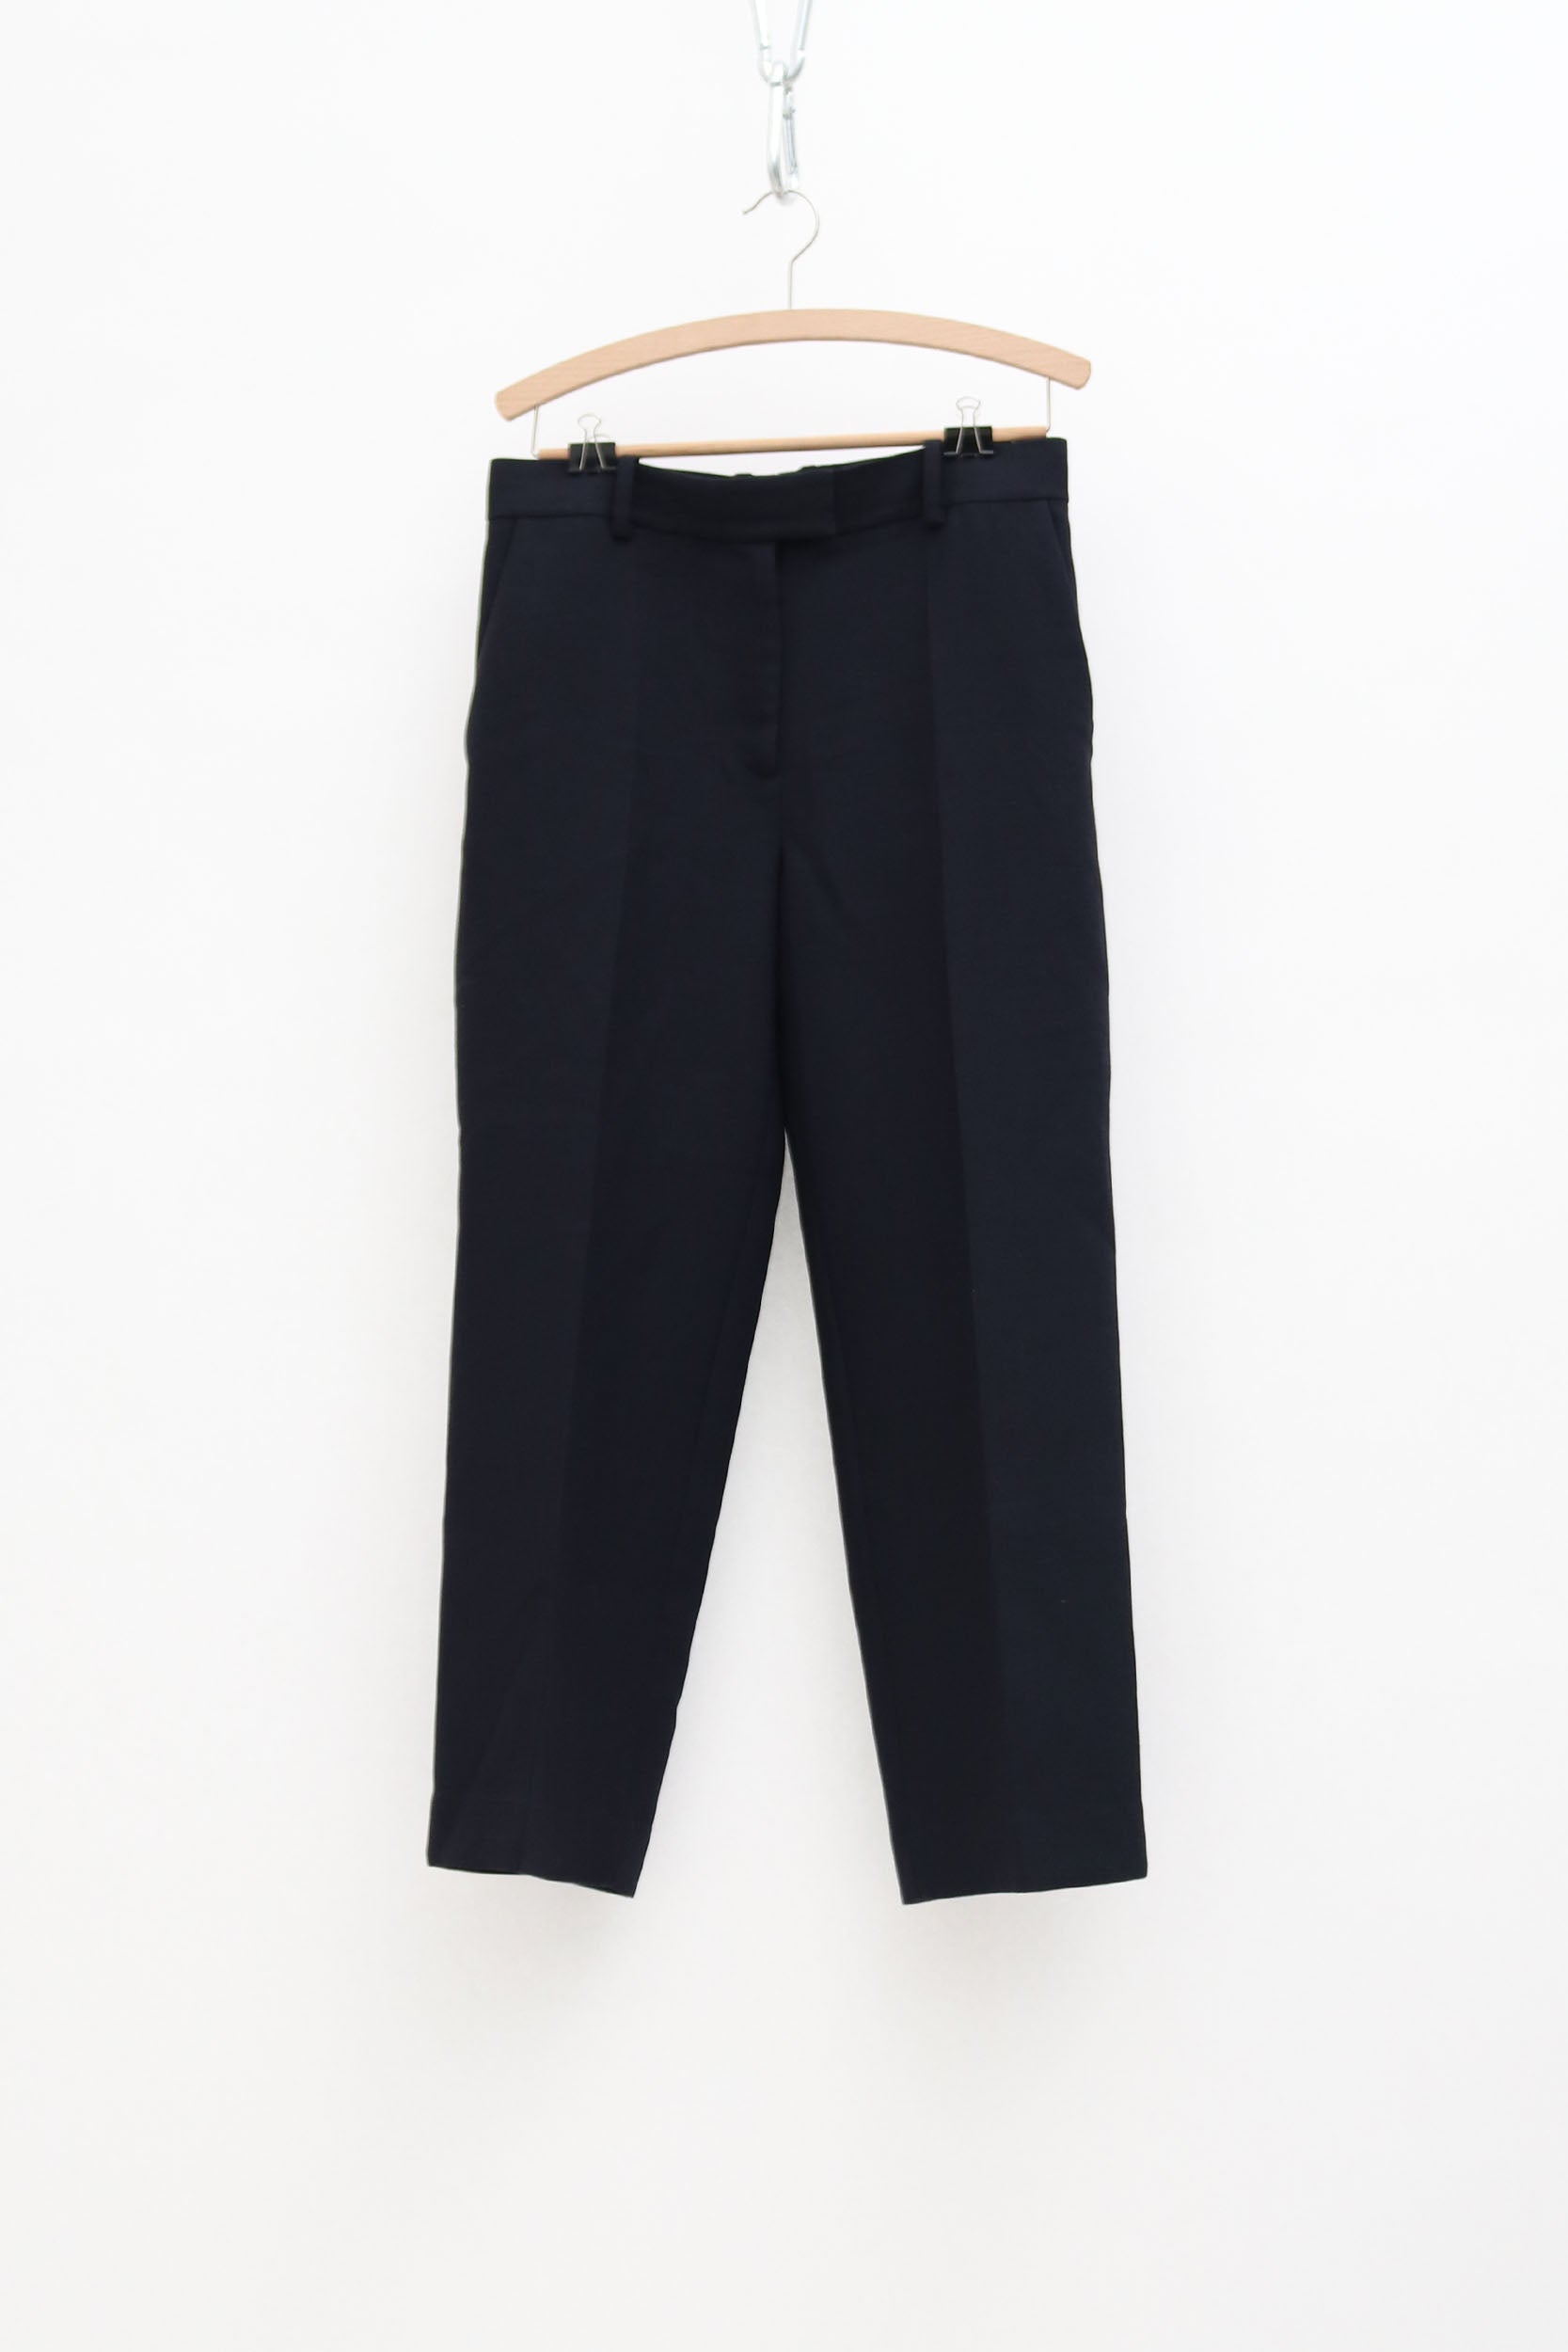 COS COS OVERSIZED-FIT ELASTICATED PANTS - BEIGE - Trousers - COS 99.00